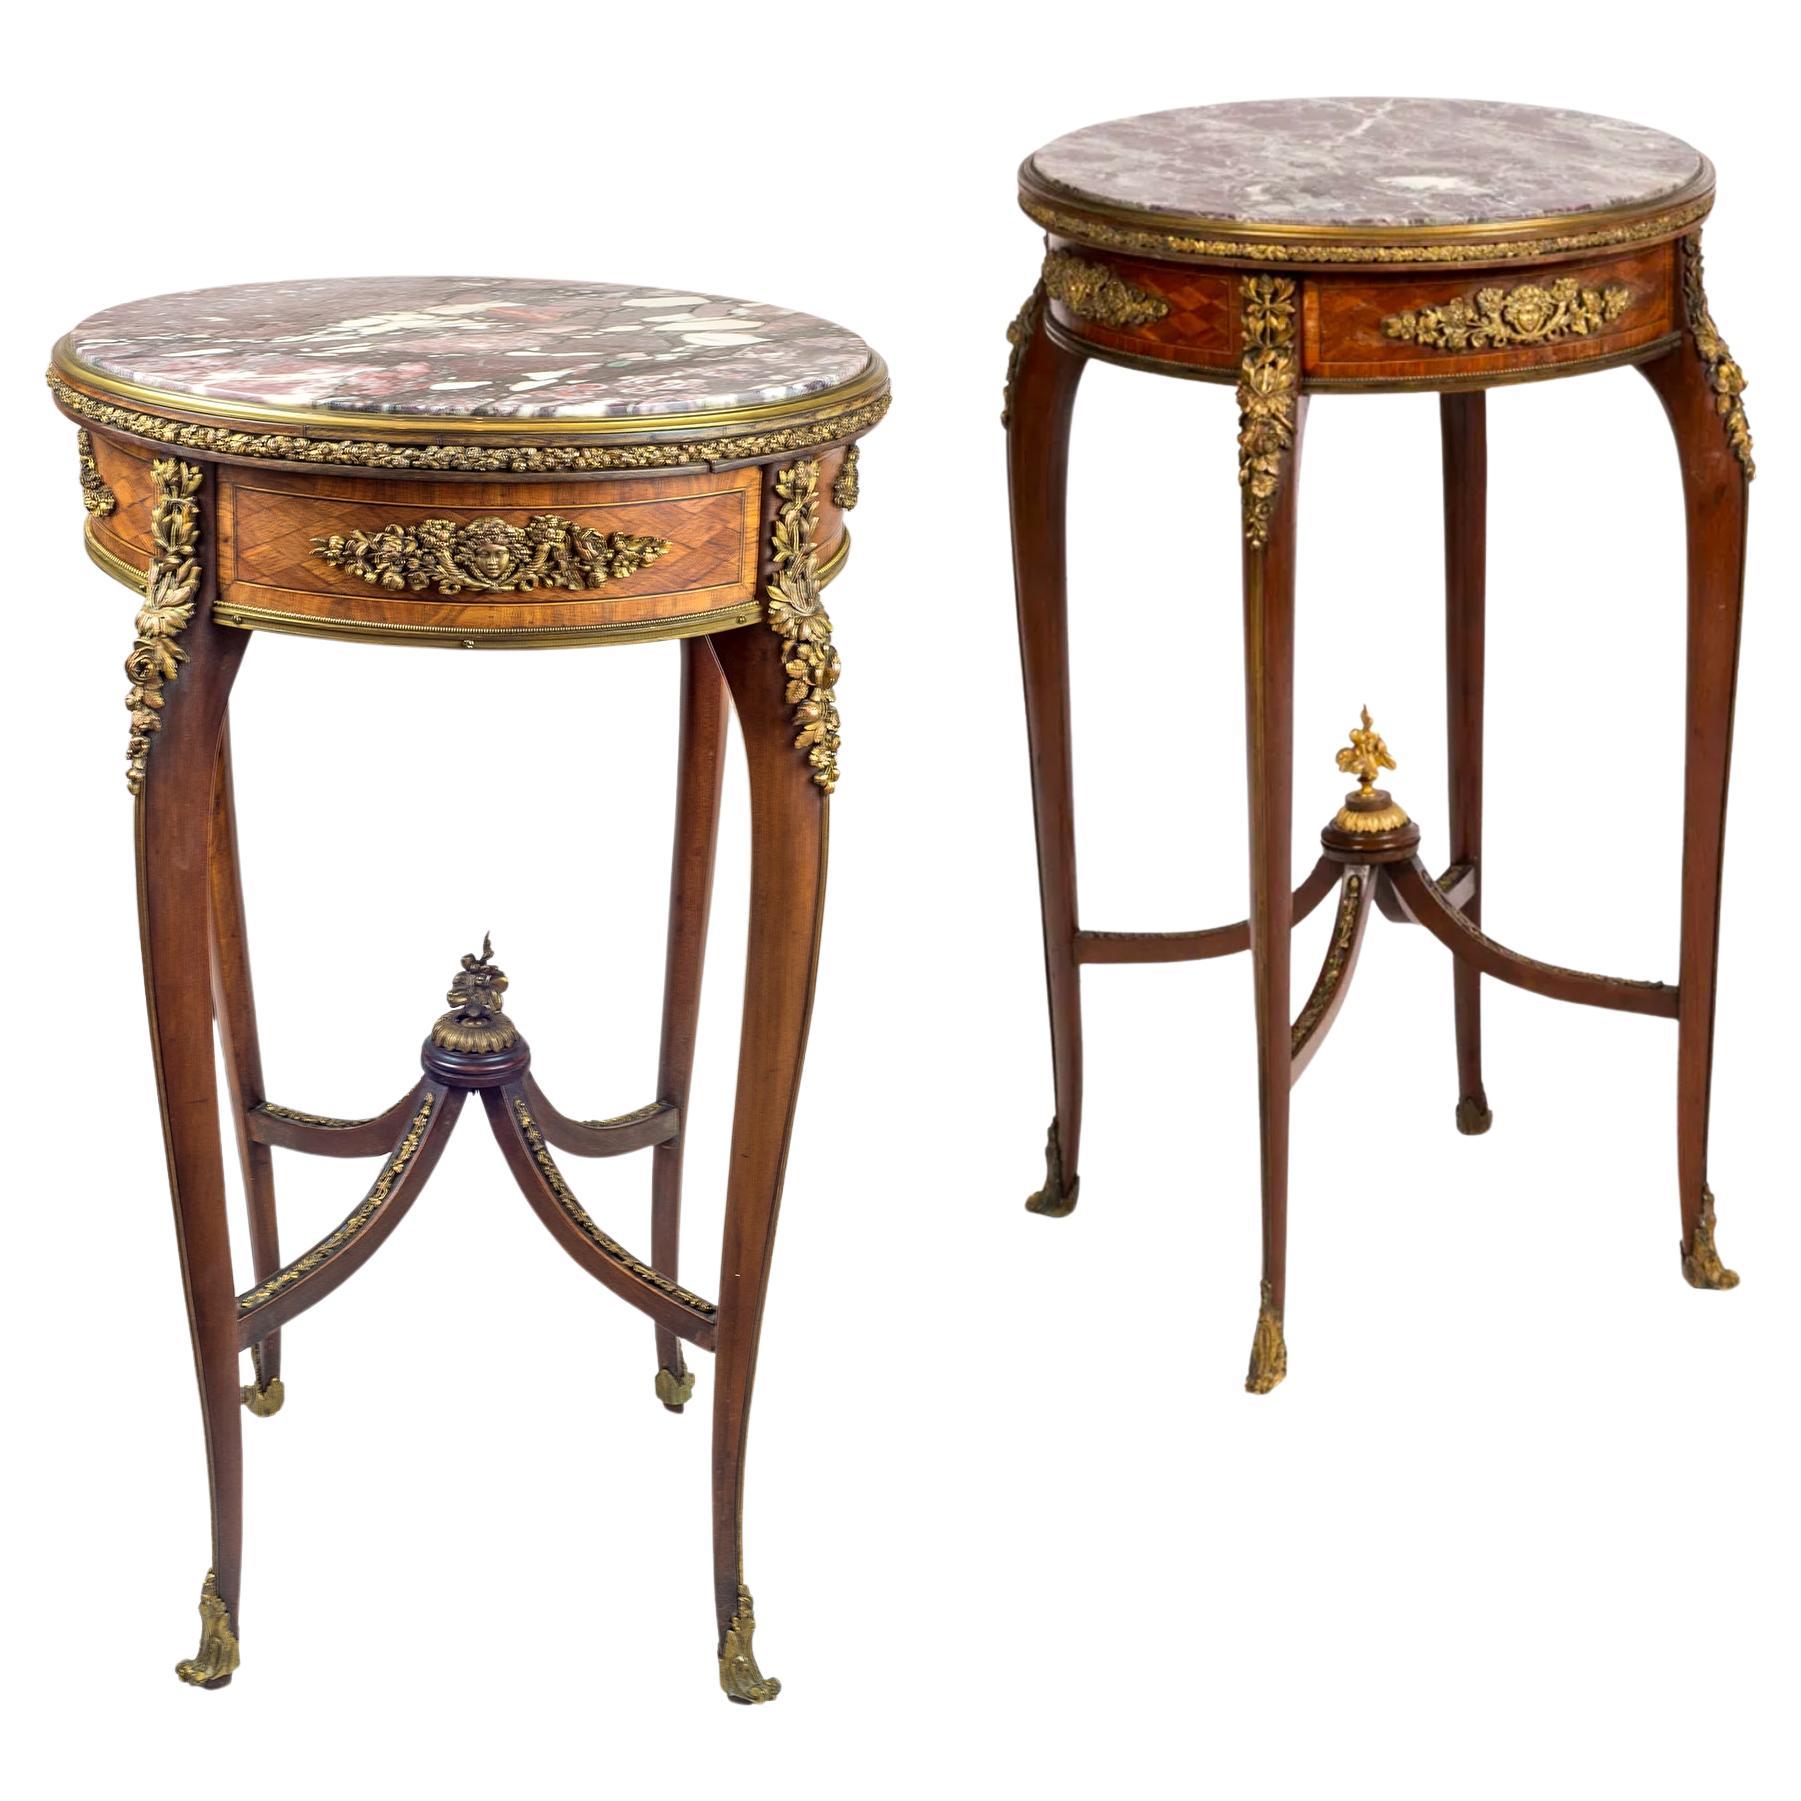 A Rare Pair of Louis XV-Style Marble Top Gueridon attributed to Francois Linke For Sale